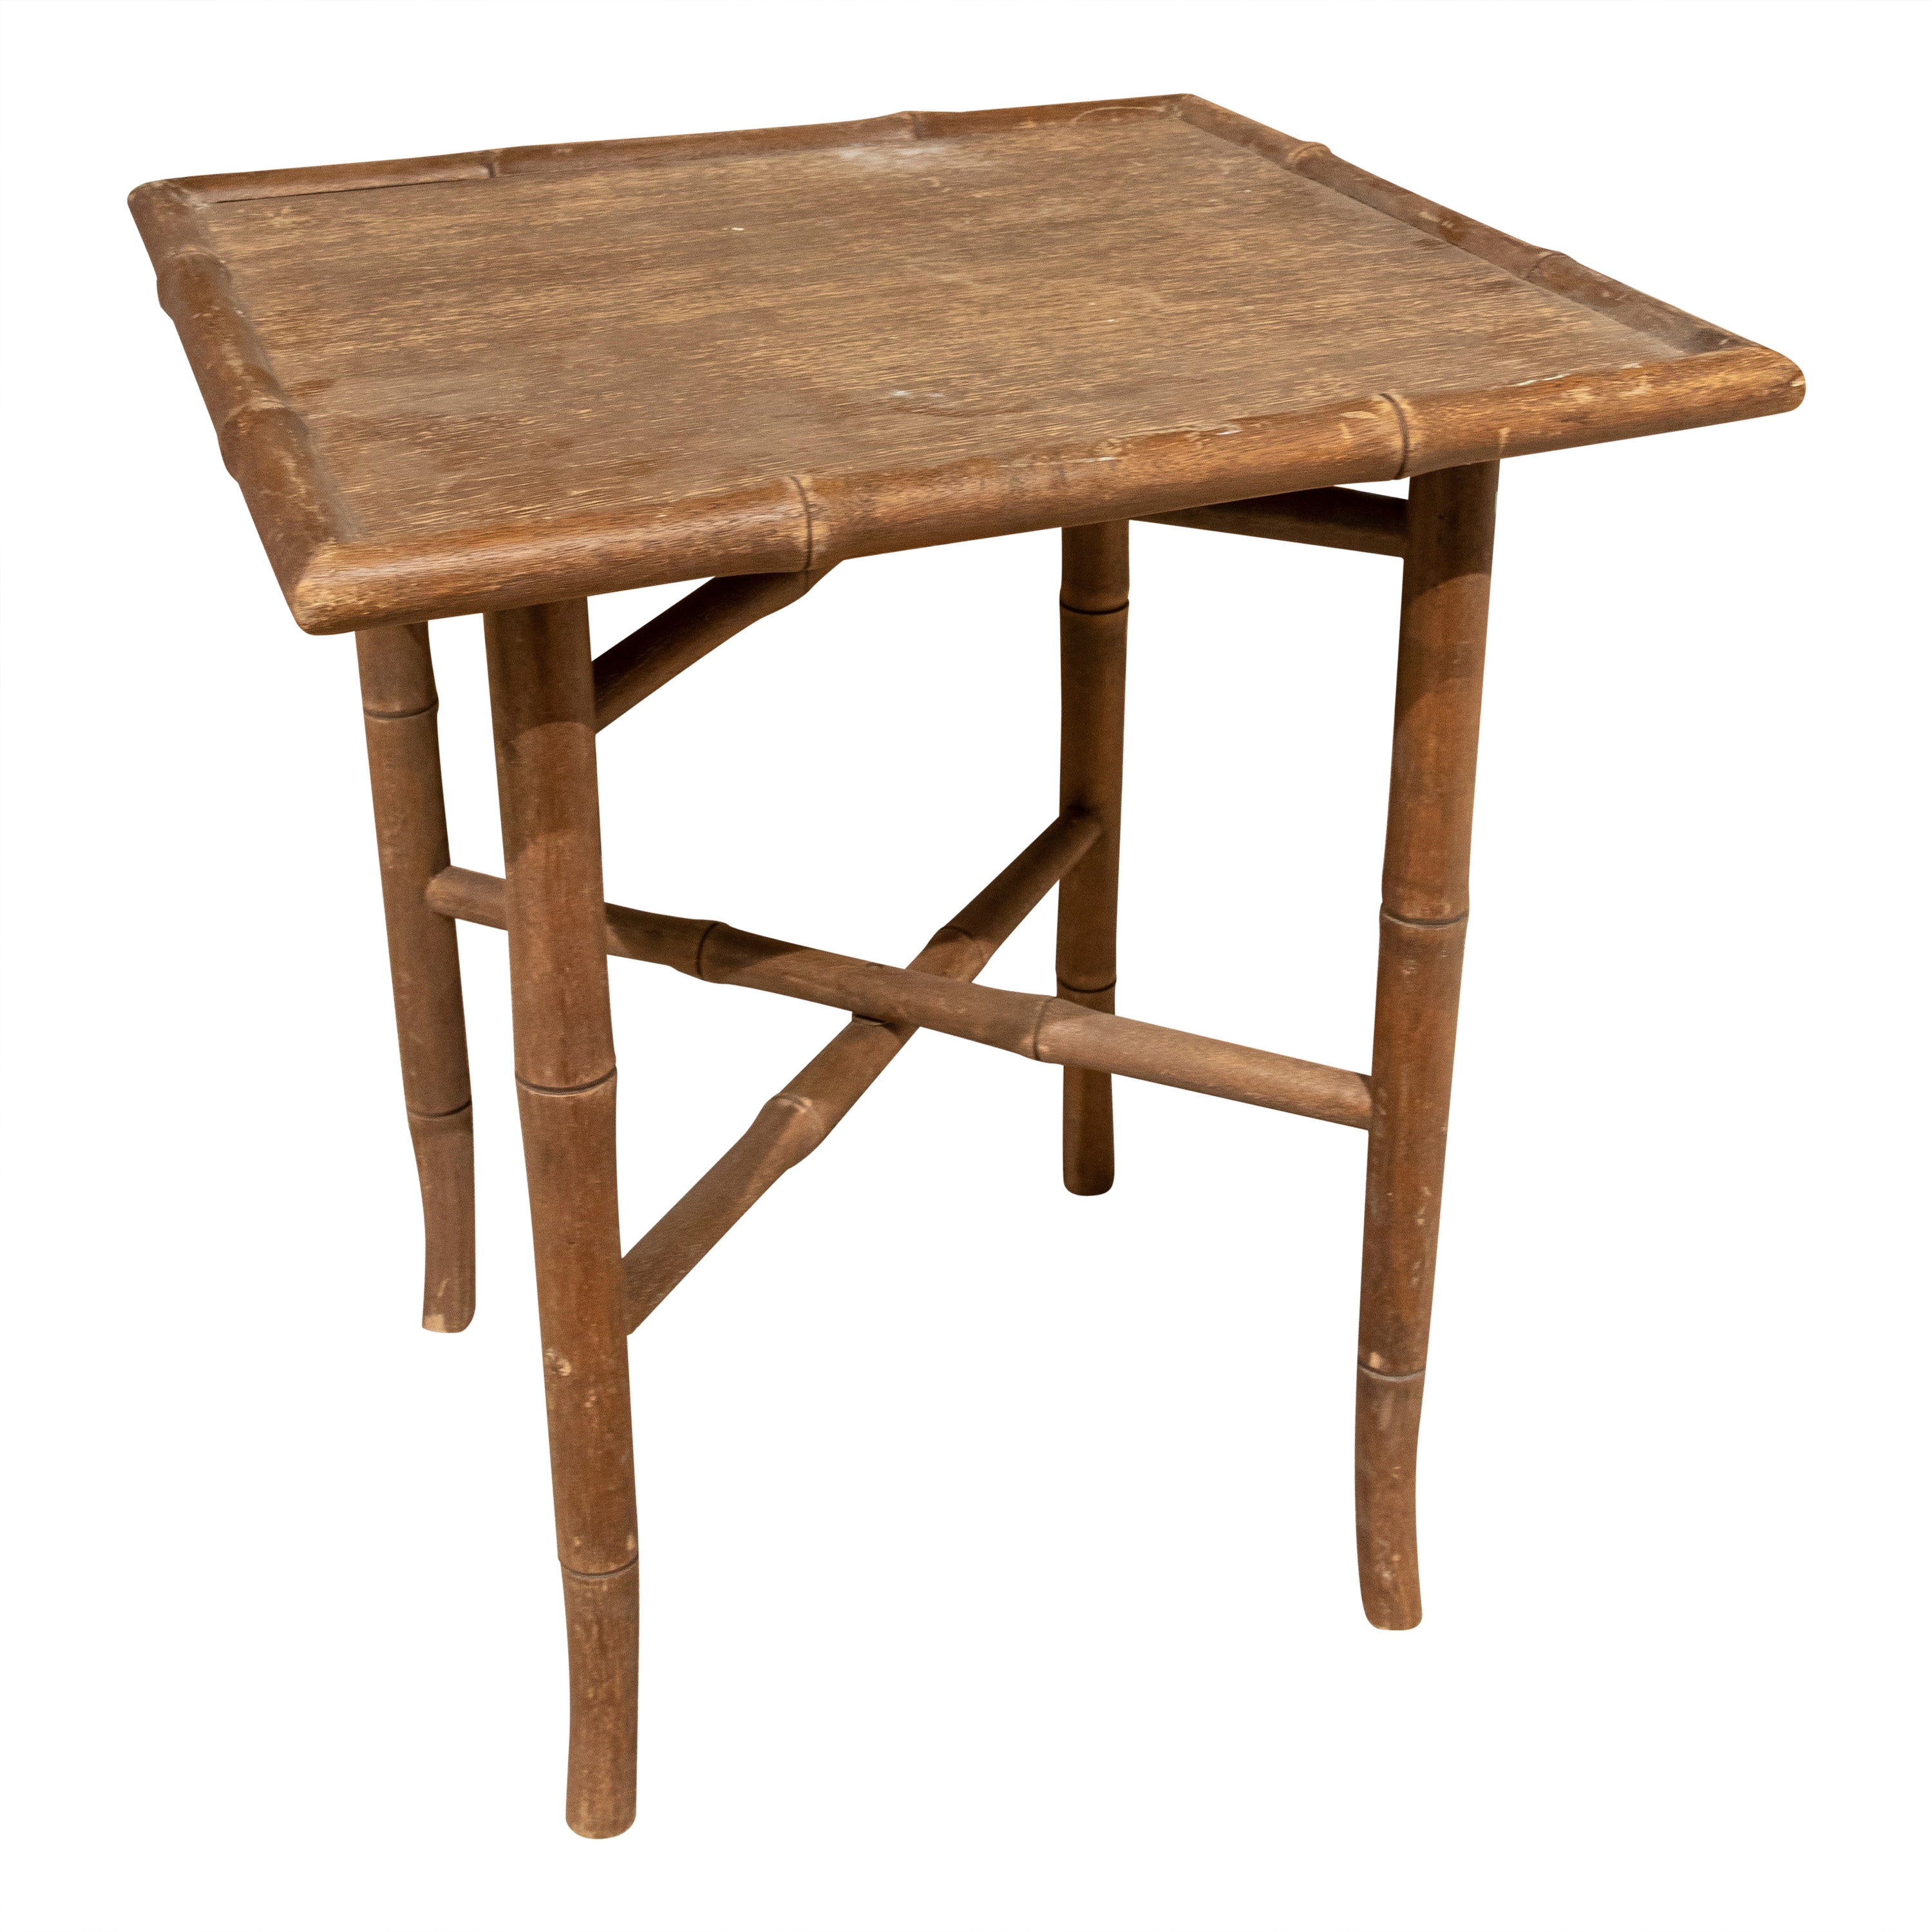 1970s Bamboo Imitation Wooden Side Table with Wooden Top For Sale